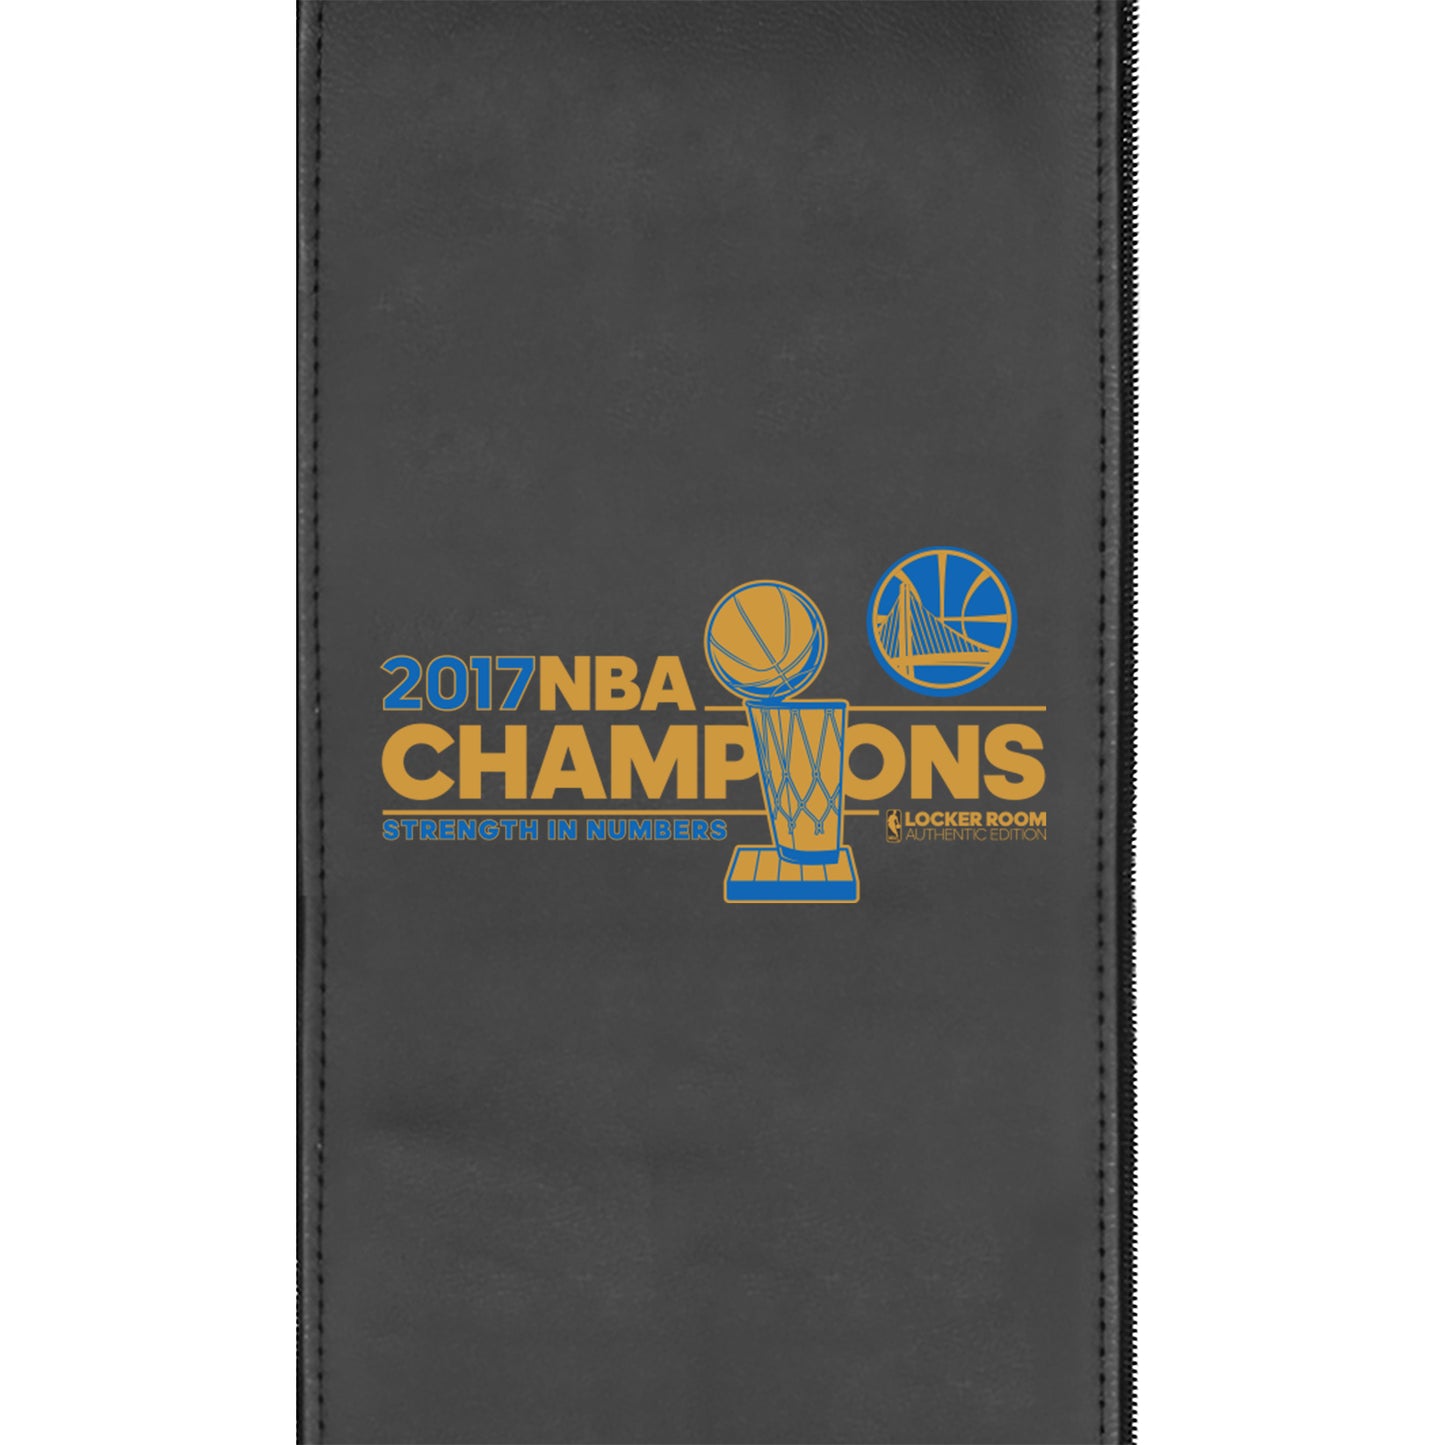 Relax Home Theater Recliner with Golden State Warriors Champions Logo